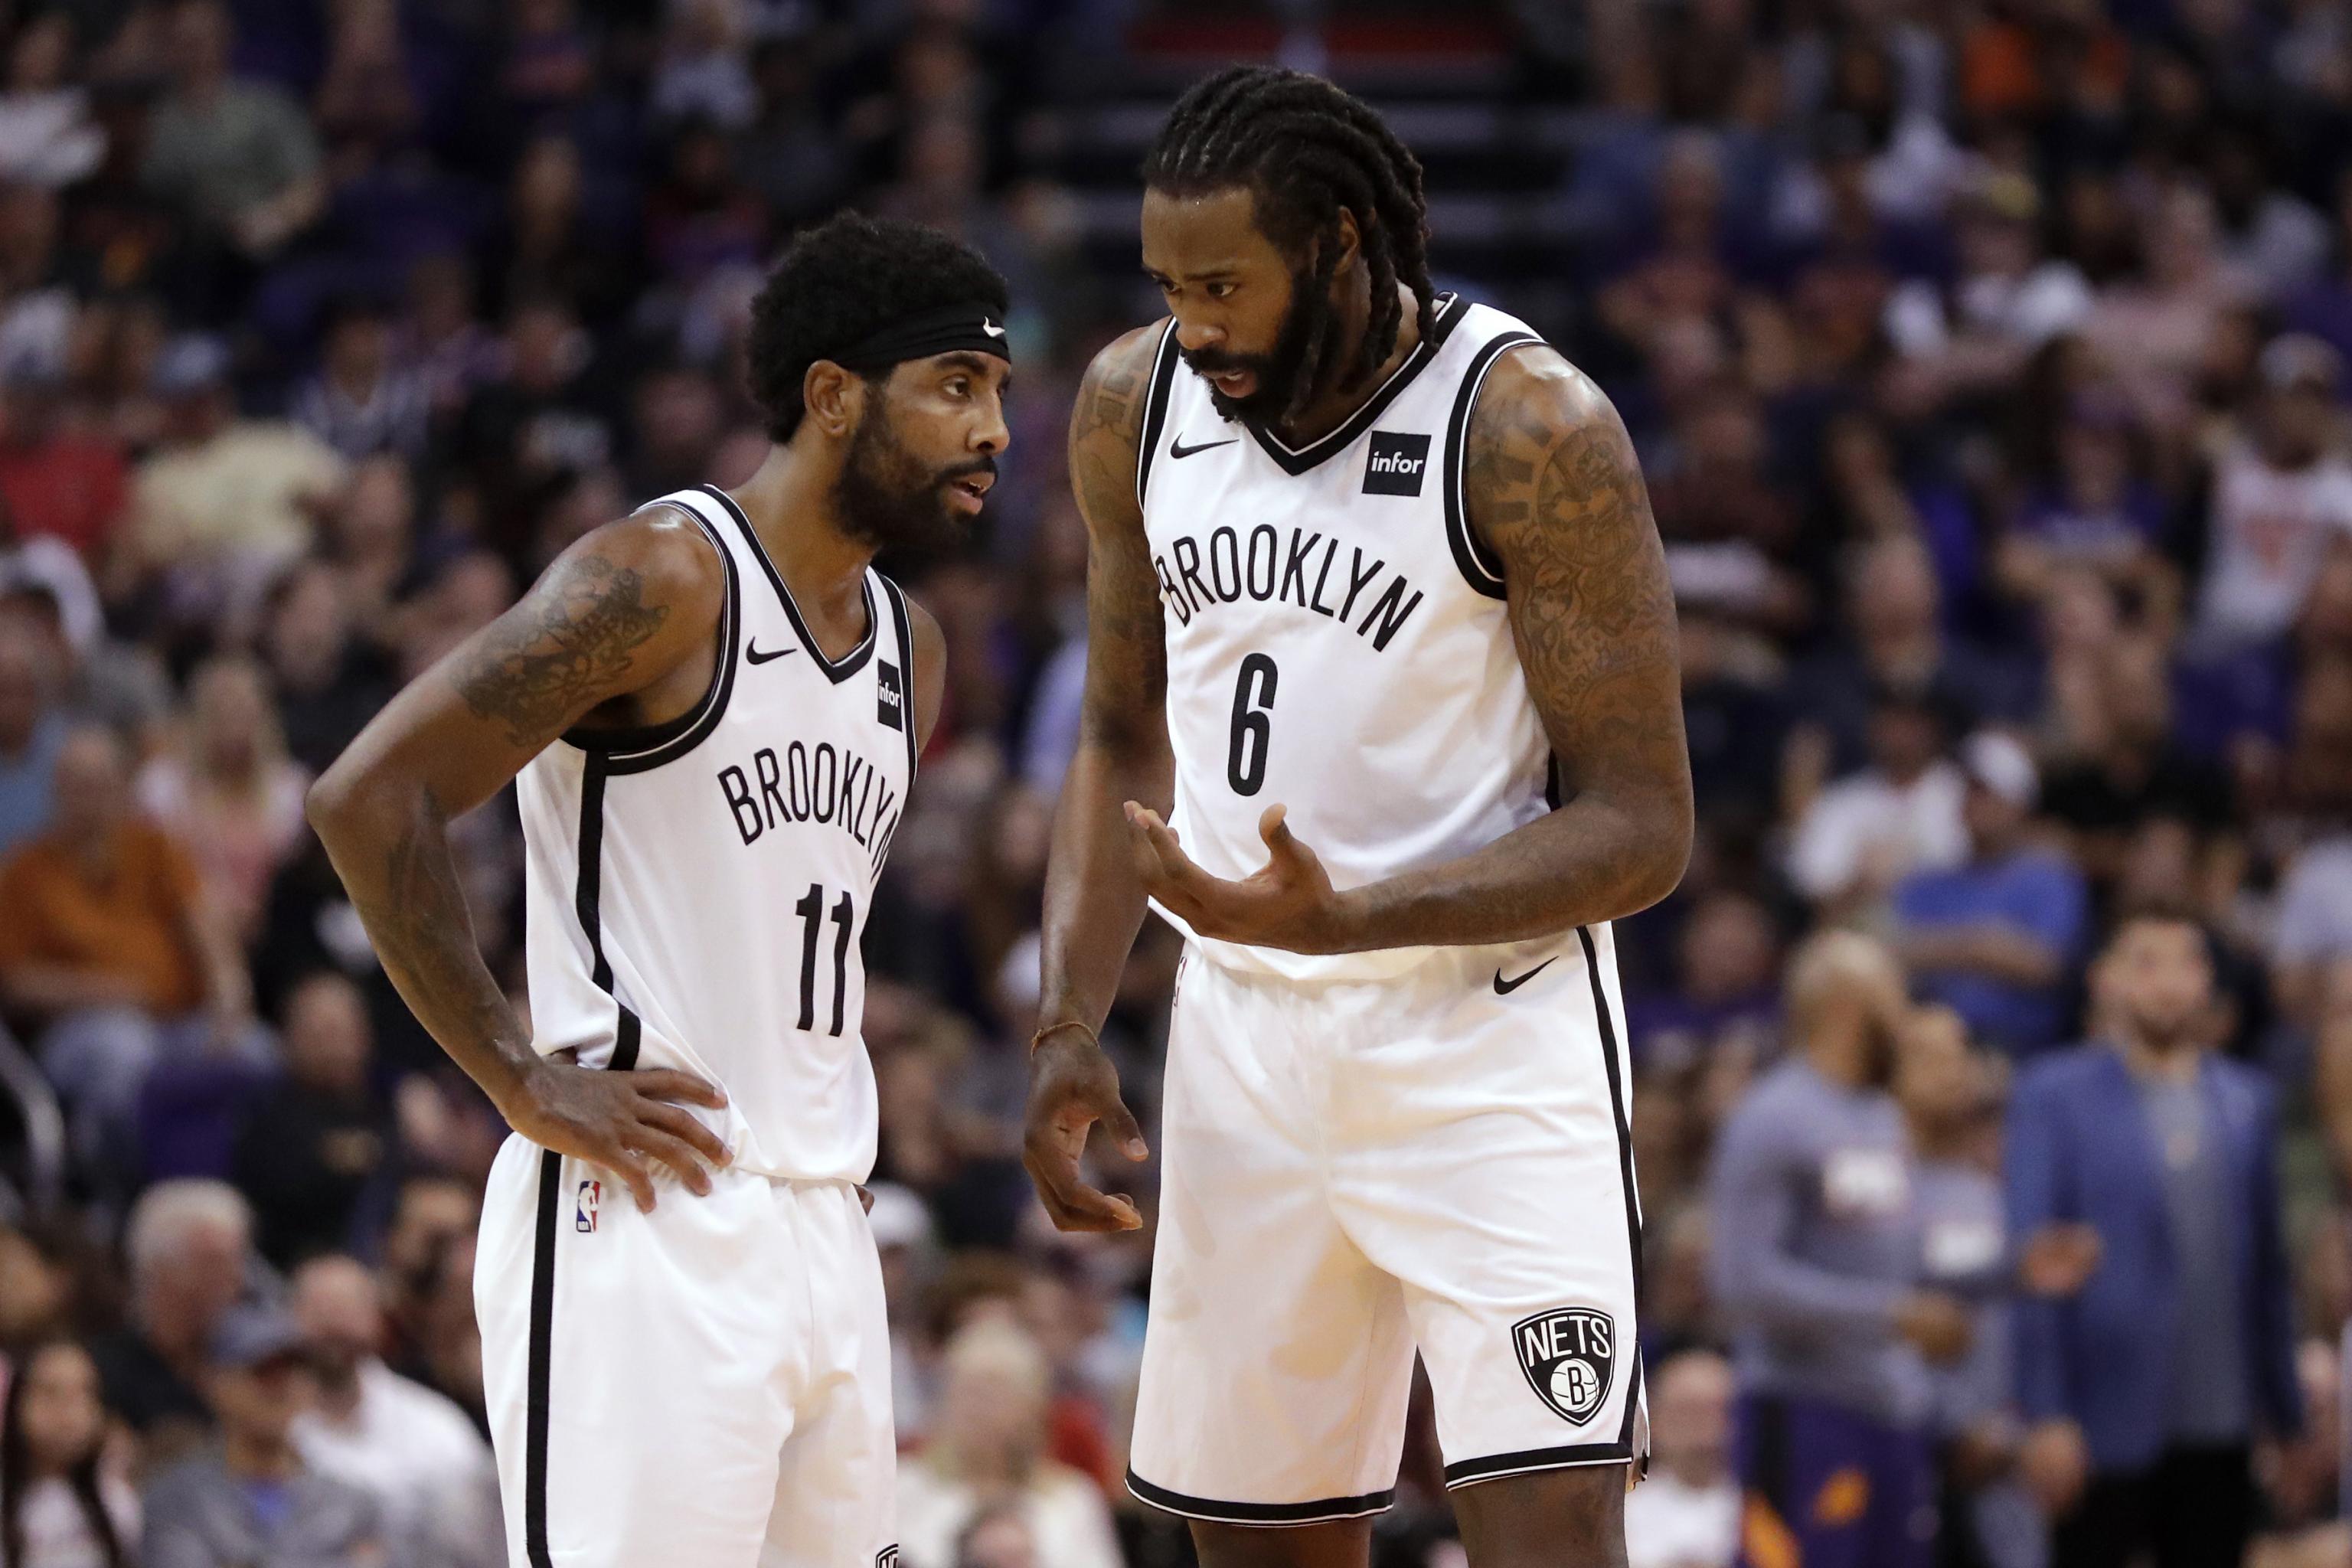 The Dispiriting Saga of Kyrie Irving and the Brooklyn Nets